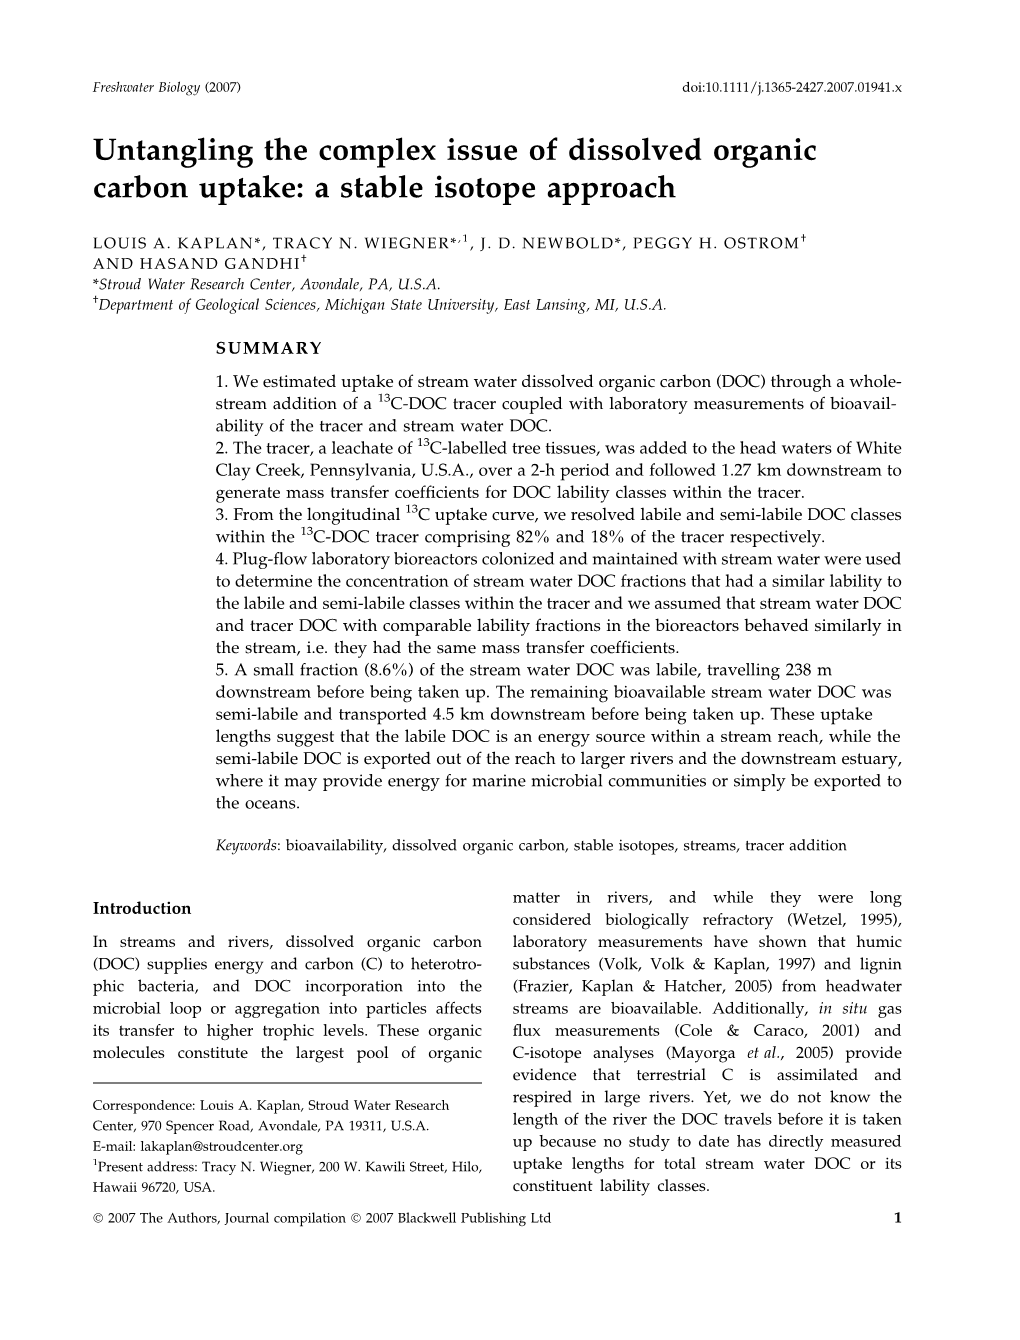 Untangling the Complex Issue of Dissolved Organic Carbon Uptake: a Stable Isotope Approach